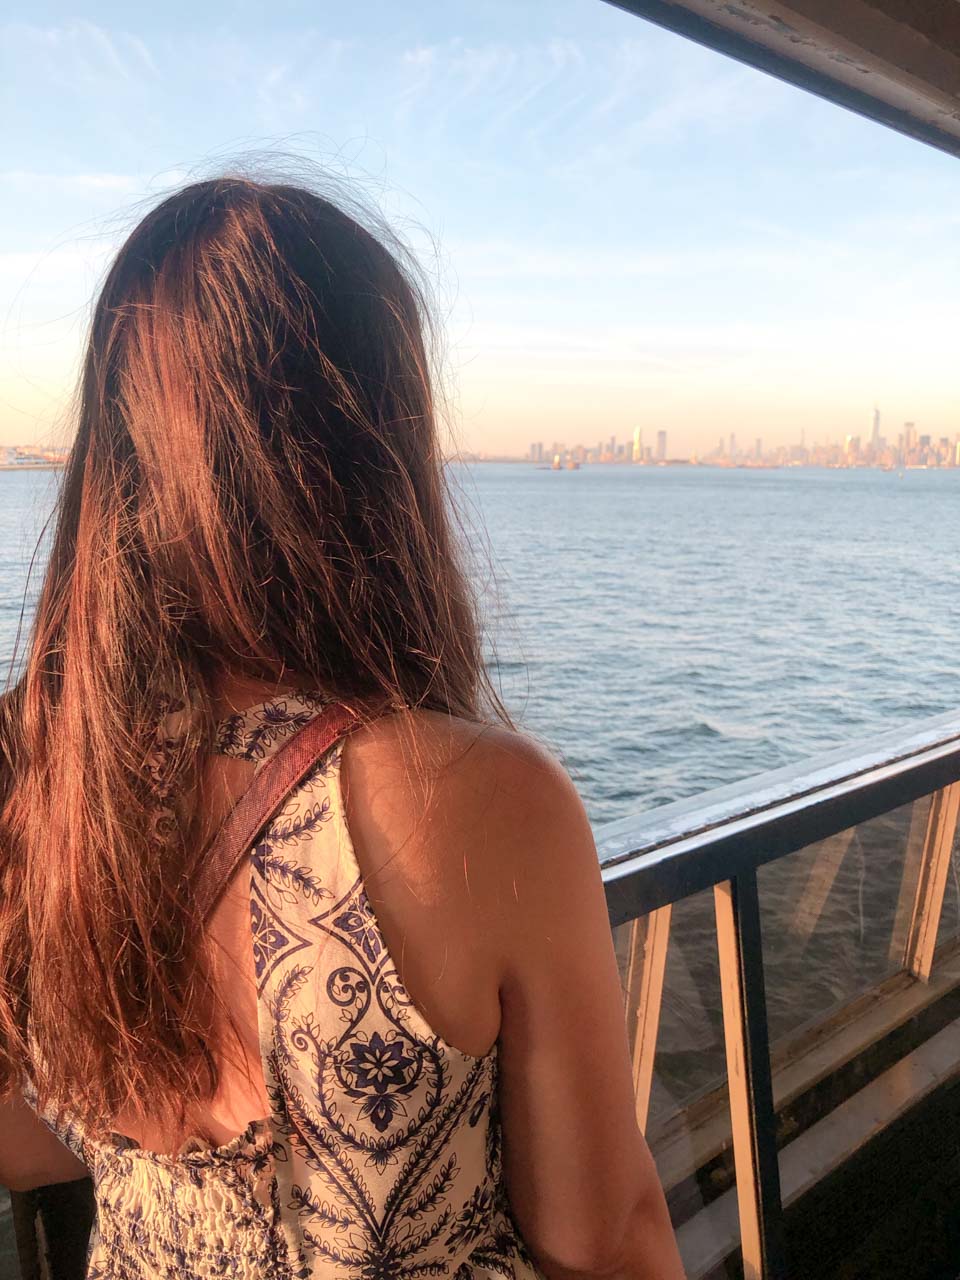 Girl with her back turned to the camera watching the Manhattan skyline from the Staten Island ferry